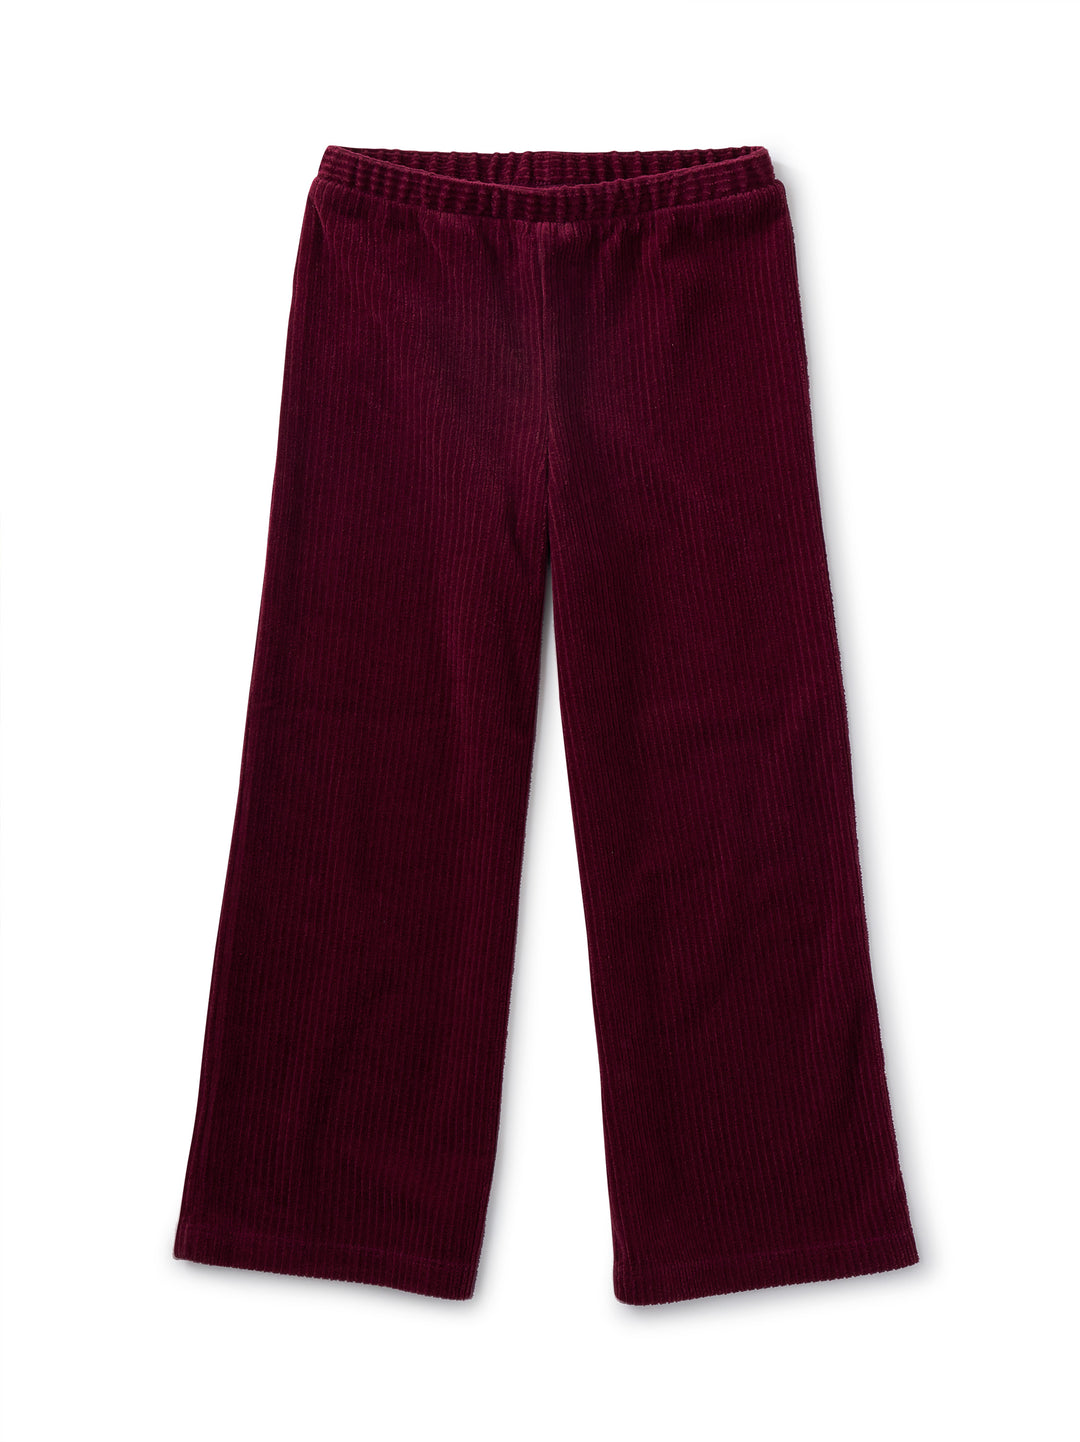 Tea Collection Flare for Fun Velour Pants in Fig